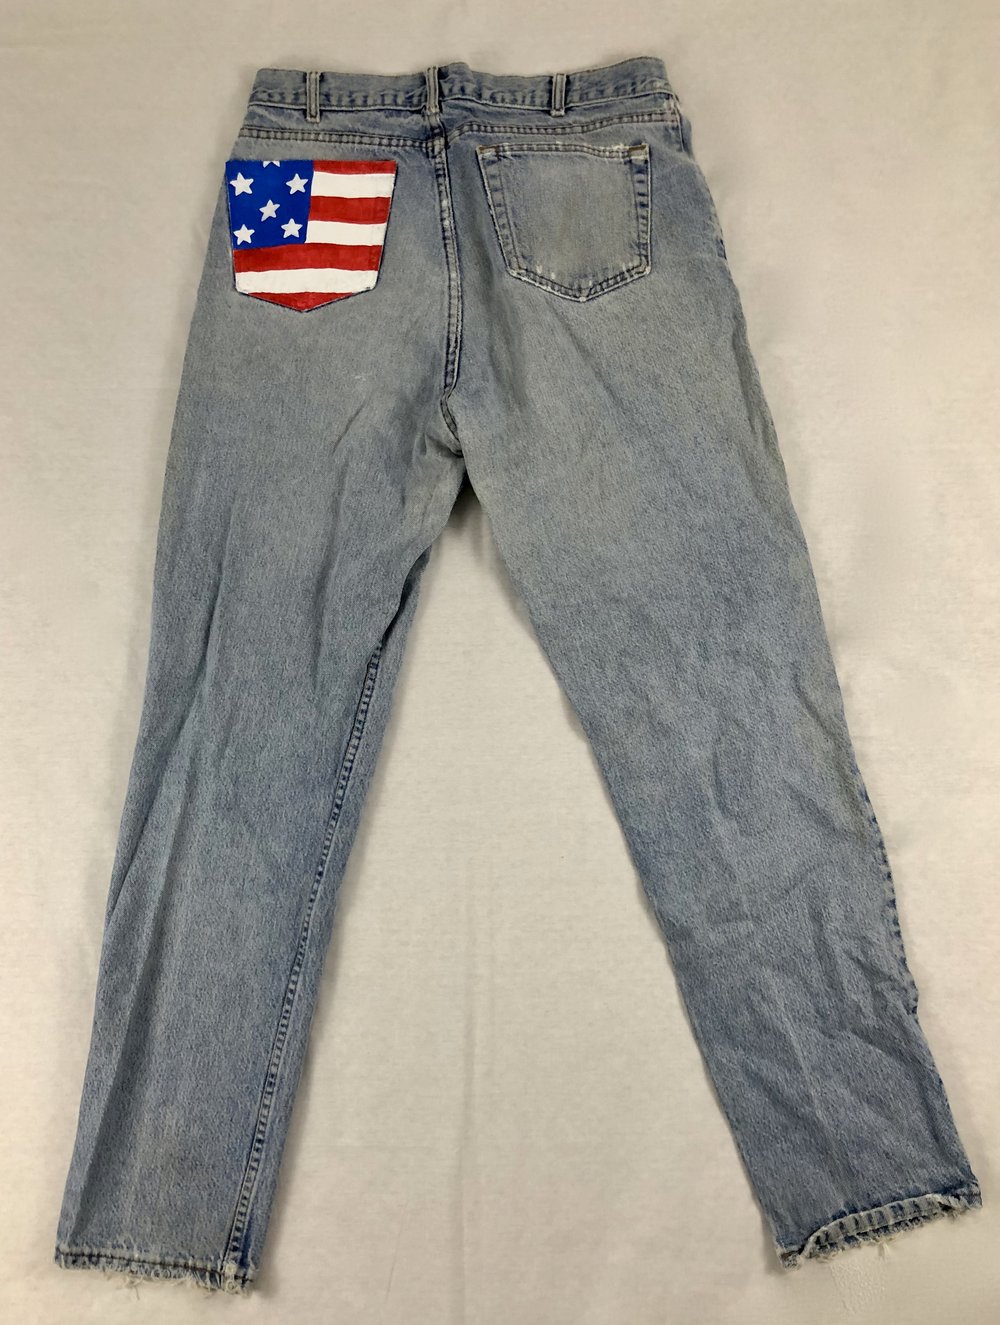 Levi's With Painted Flag Pocket Size 35x33 — 